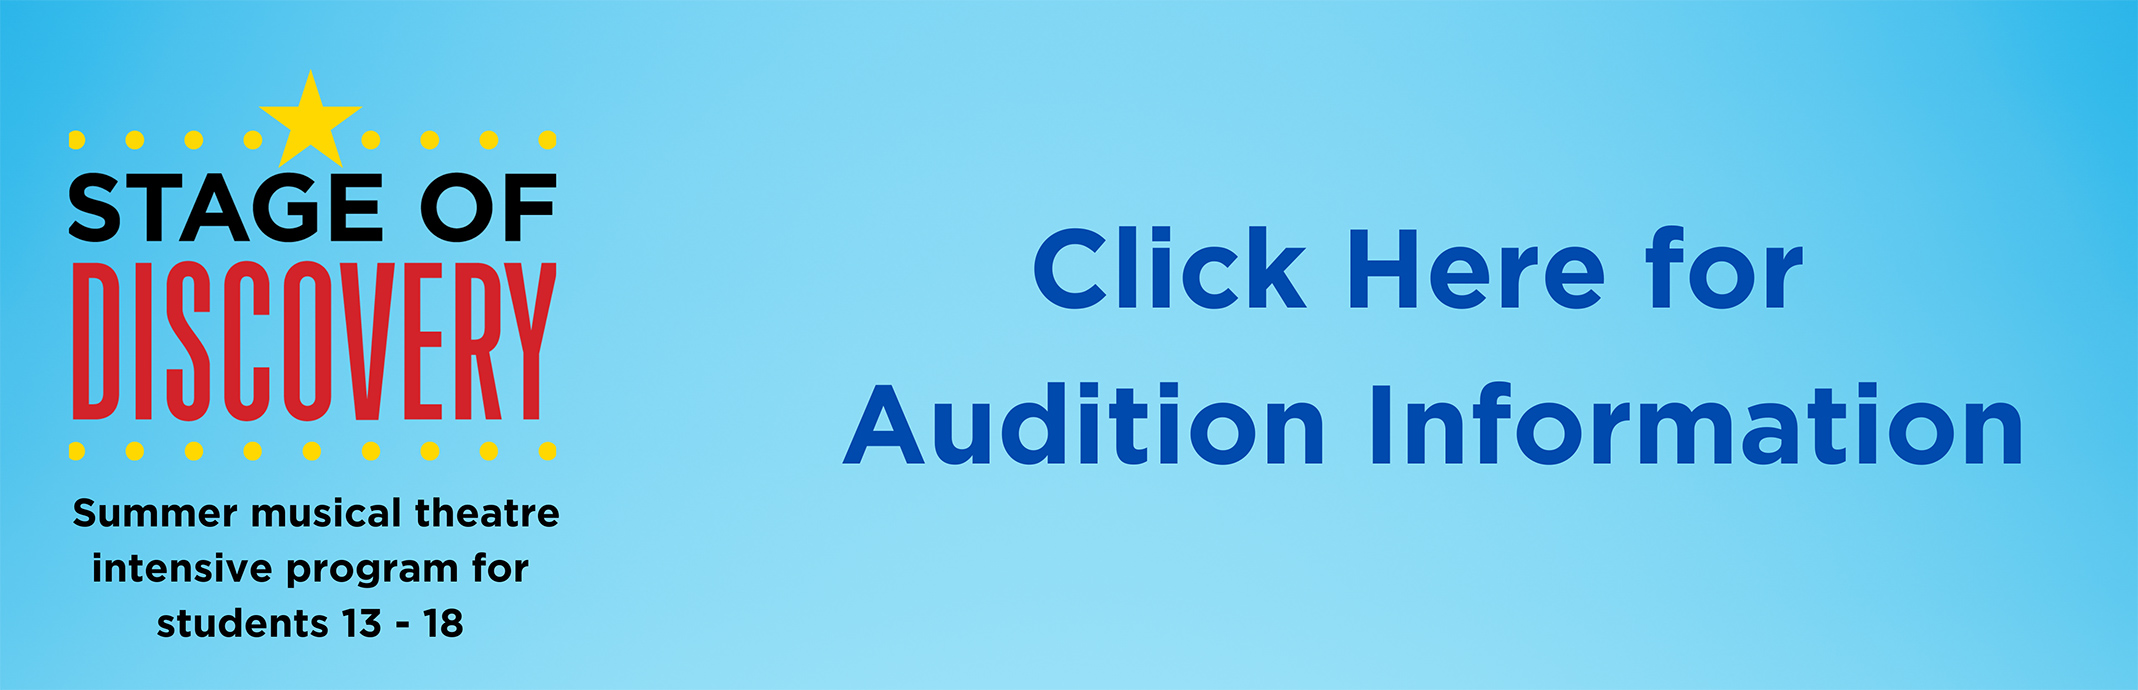 Stage of Discovery: Click here for Audition Information